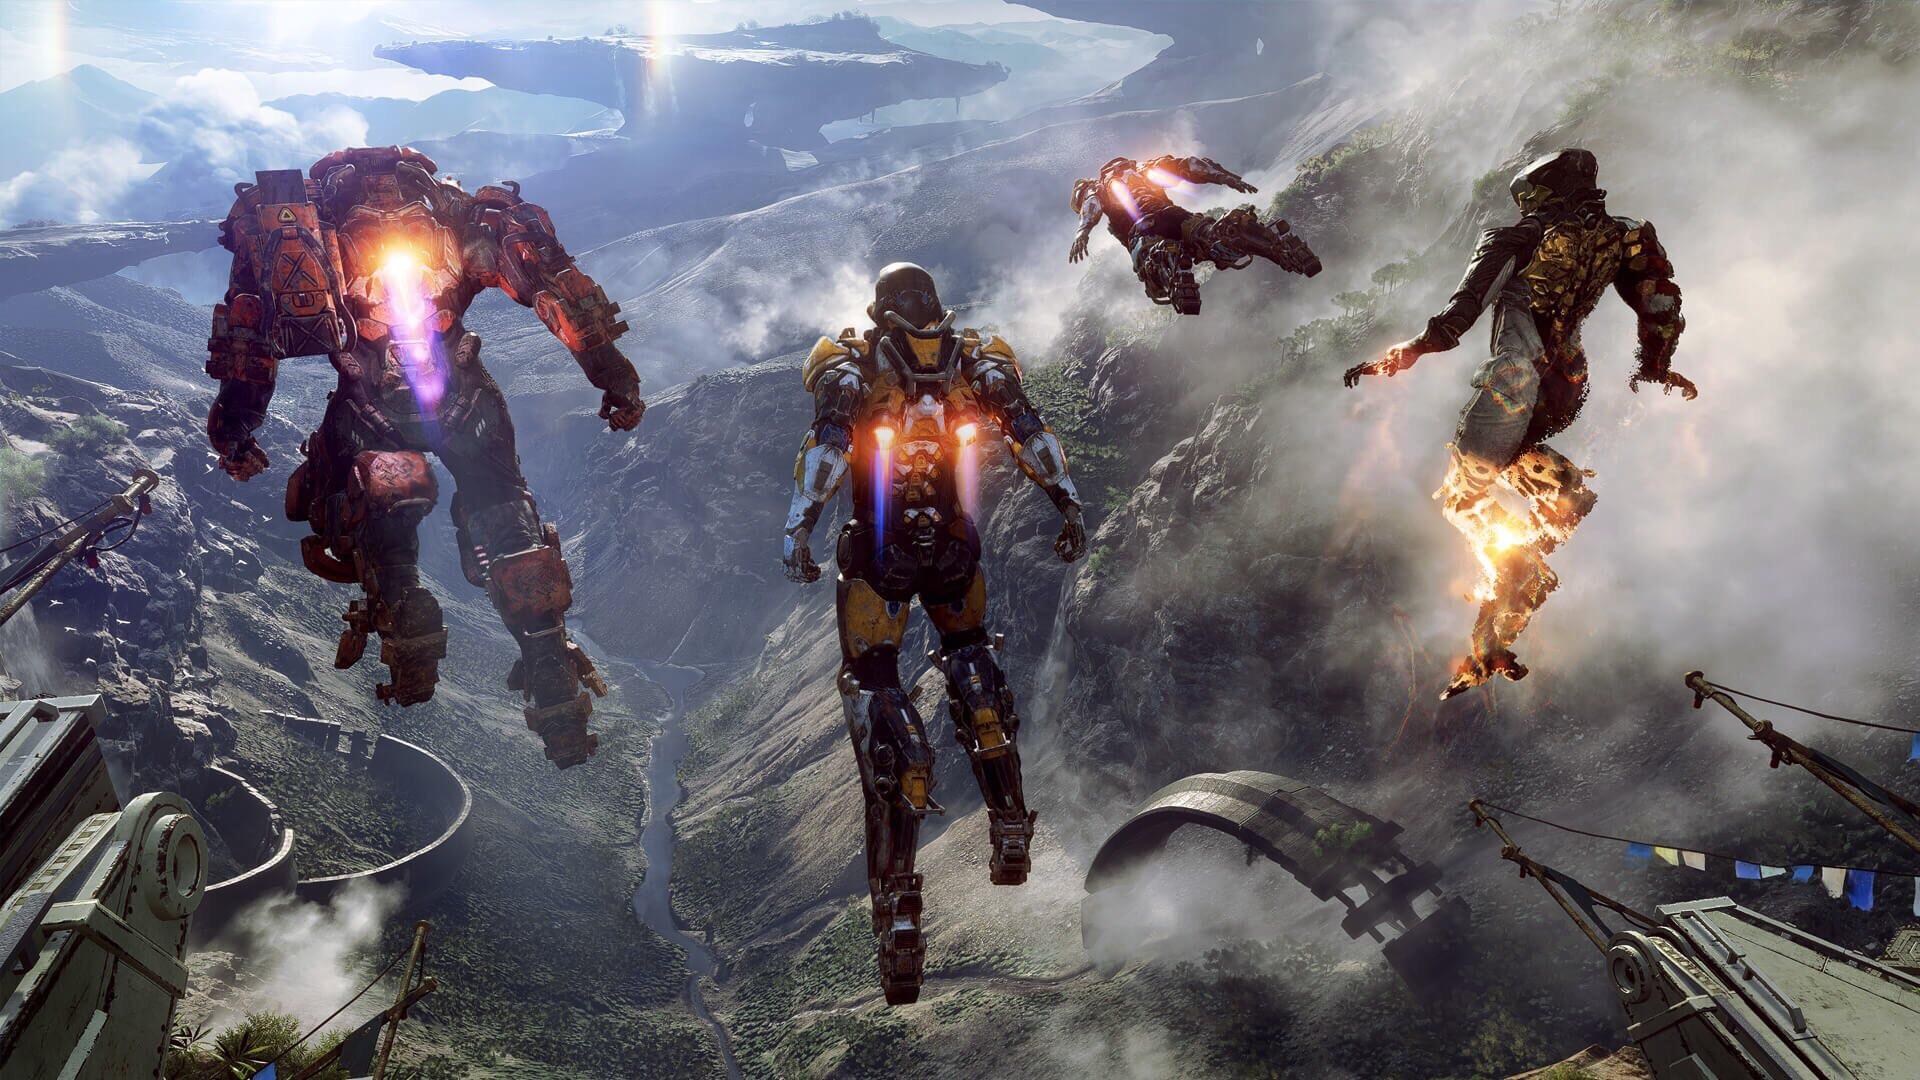 Media asset in full size related to 3dfxzone.it news item entitled as follows: Teaser trailer, gameplay preview e screenshot dell'action-RPG Anthem di EA | Image Name: news26648_Anthem-Screenshot_1.jpg